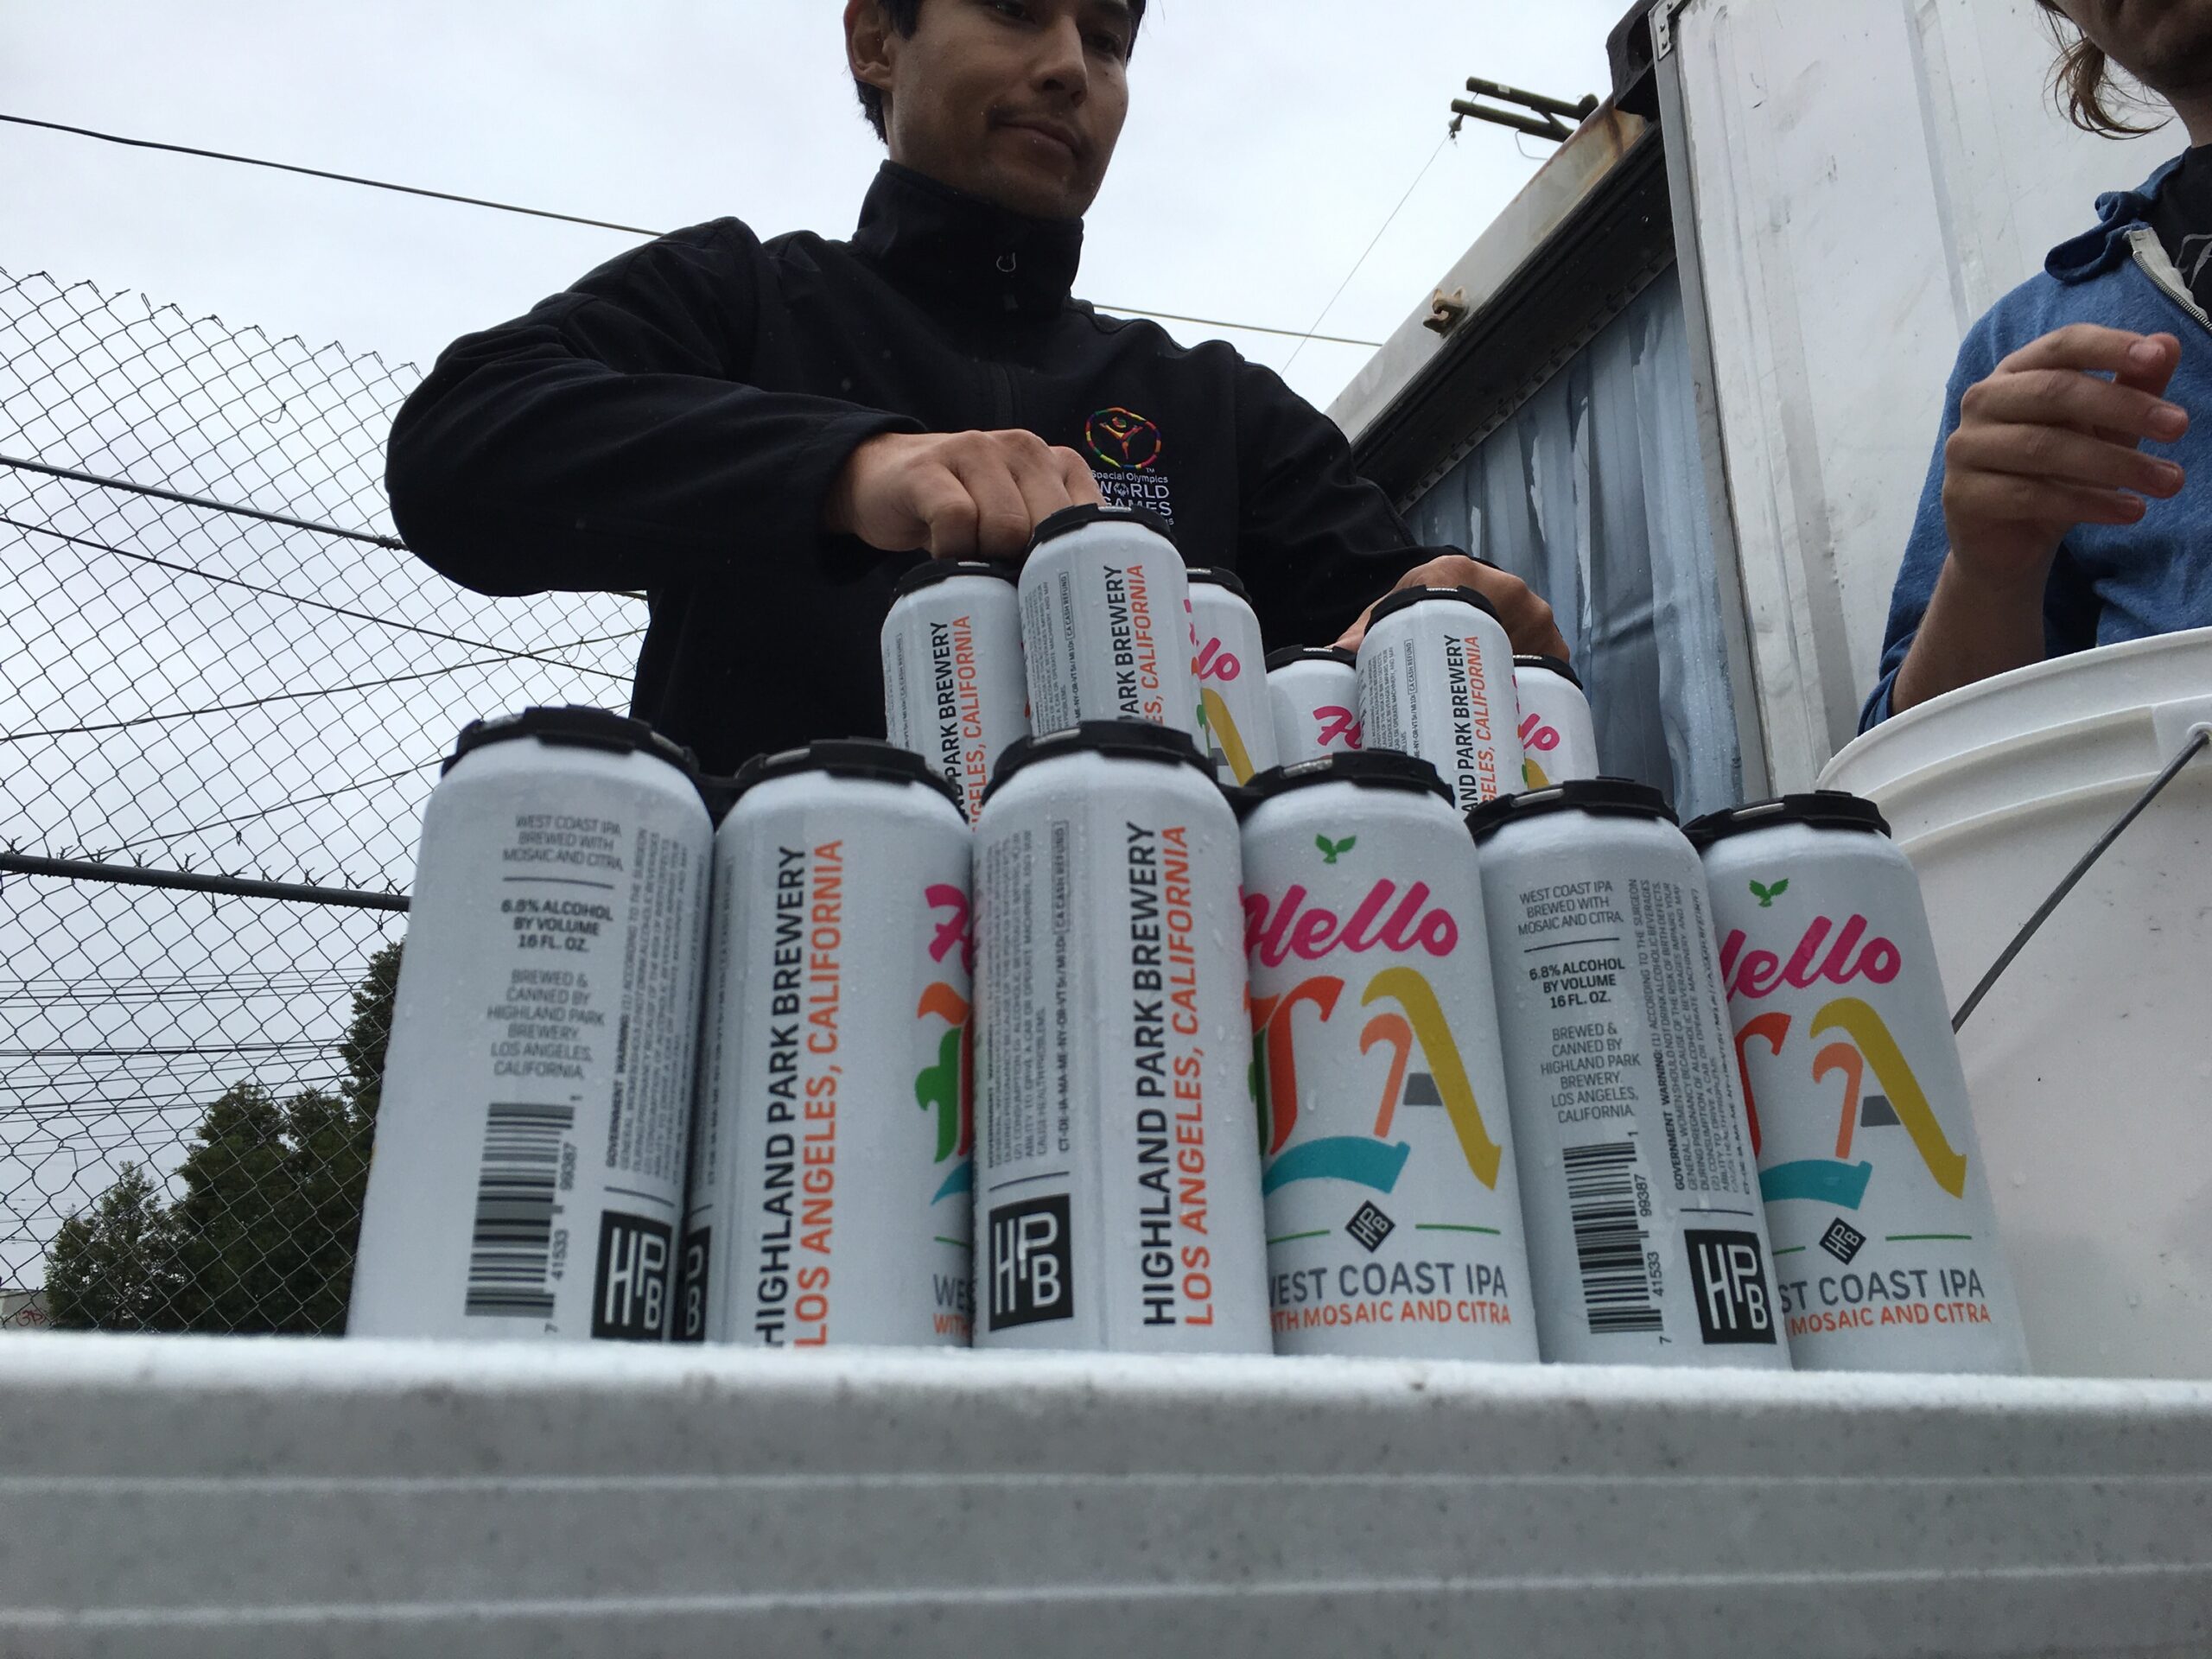 https://dontdrinkbeer.com/2016/04/08/dudes-standing-in-line-in-the-rain-for-ipa-cans-i-pense-la-didnt-even-treehouse